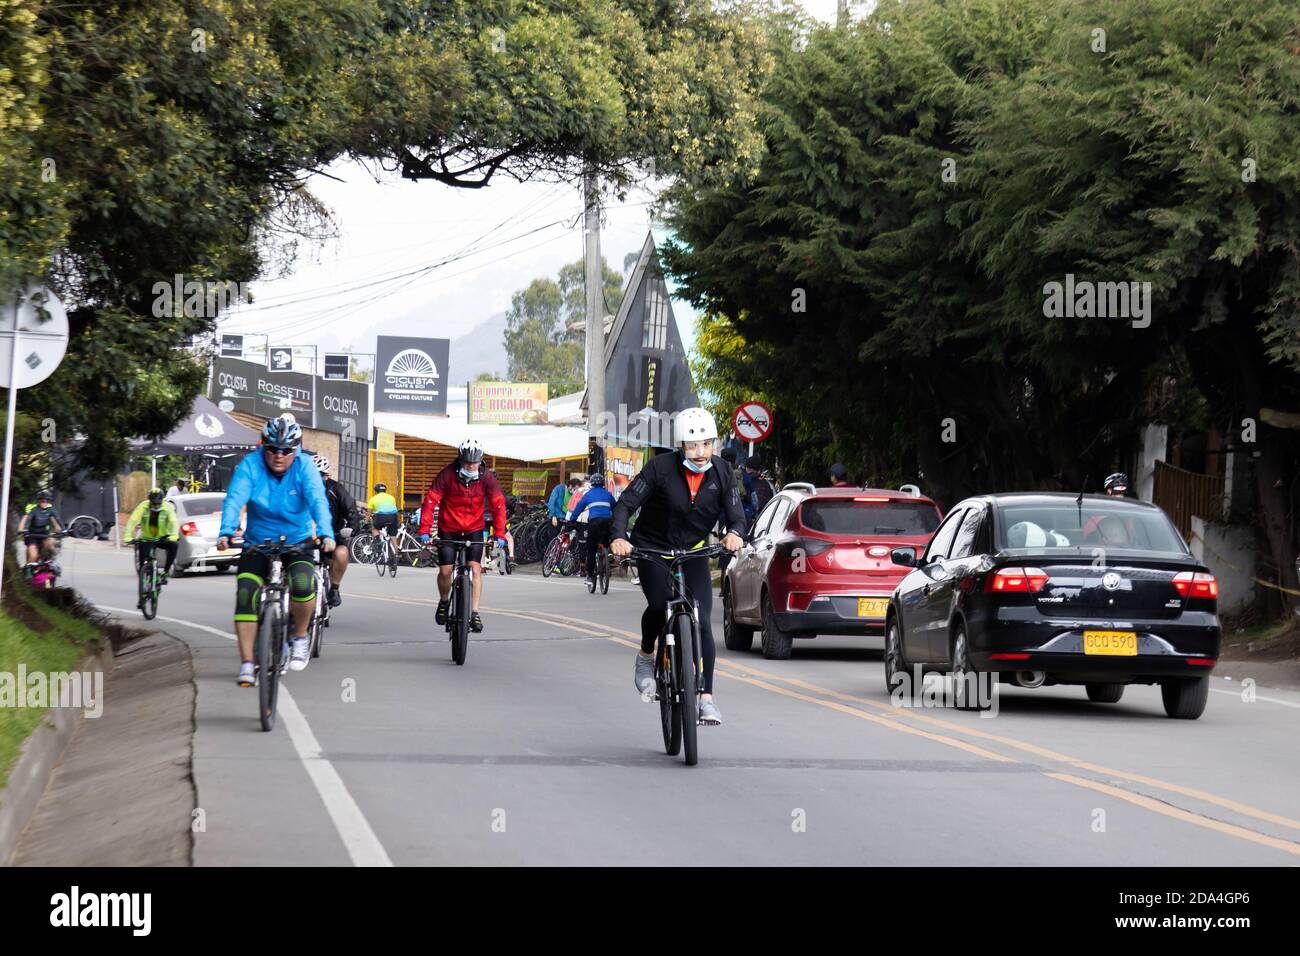 LA CALERA COLOMBIA - OCTOBER, 2020: Group of amateur cyclists arriving to the well known Alto de Patios on the road between Bogota and La Calera on th Stock Photo